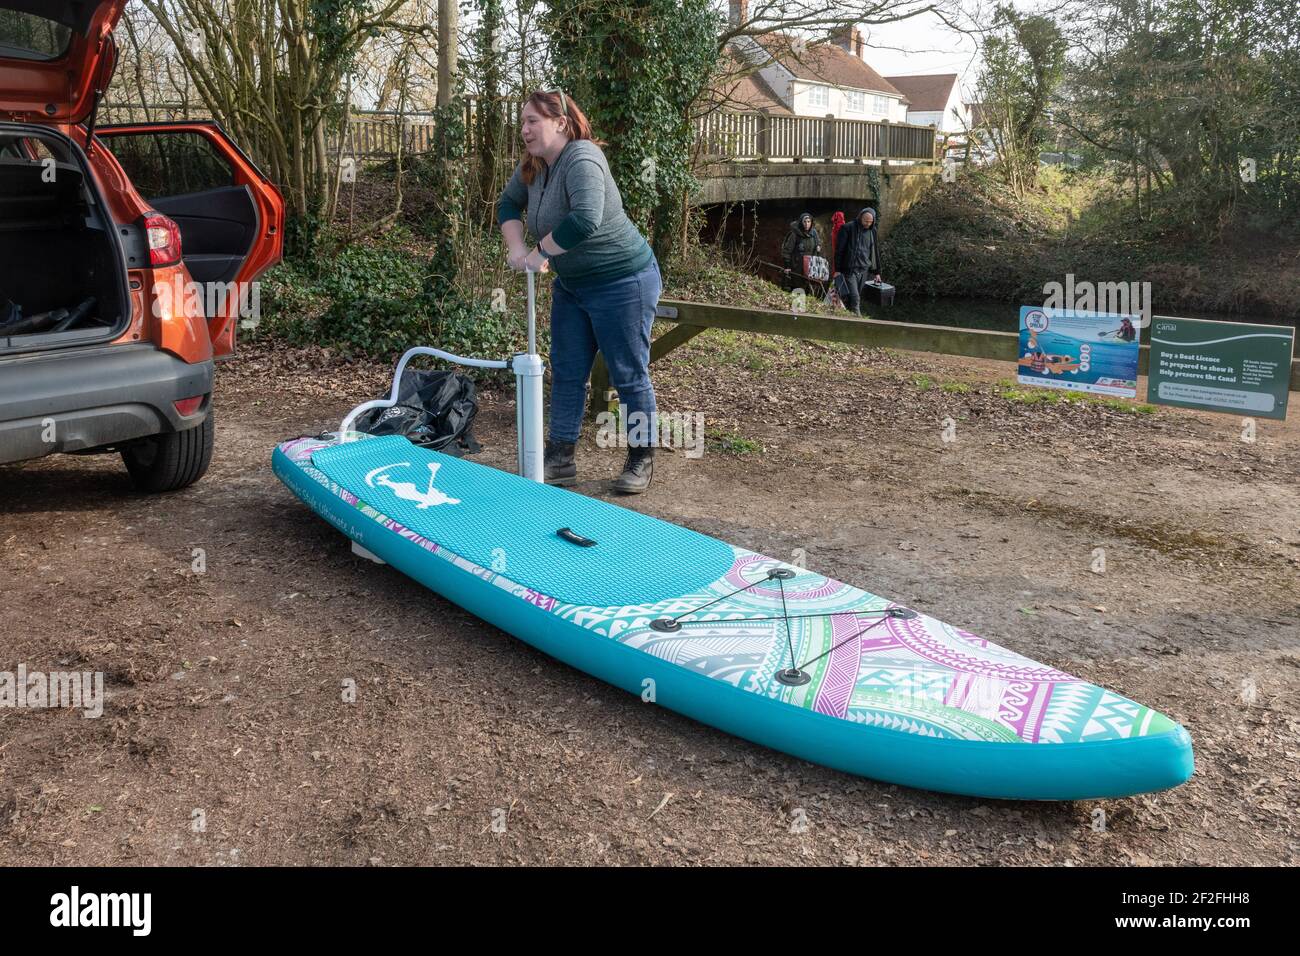 Woman inflating a paddle board (SUP) with a hand pump beside a canal, UK Stock Photo